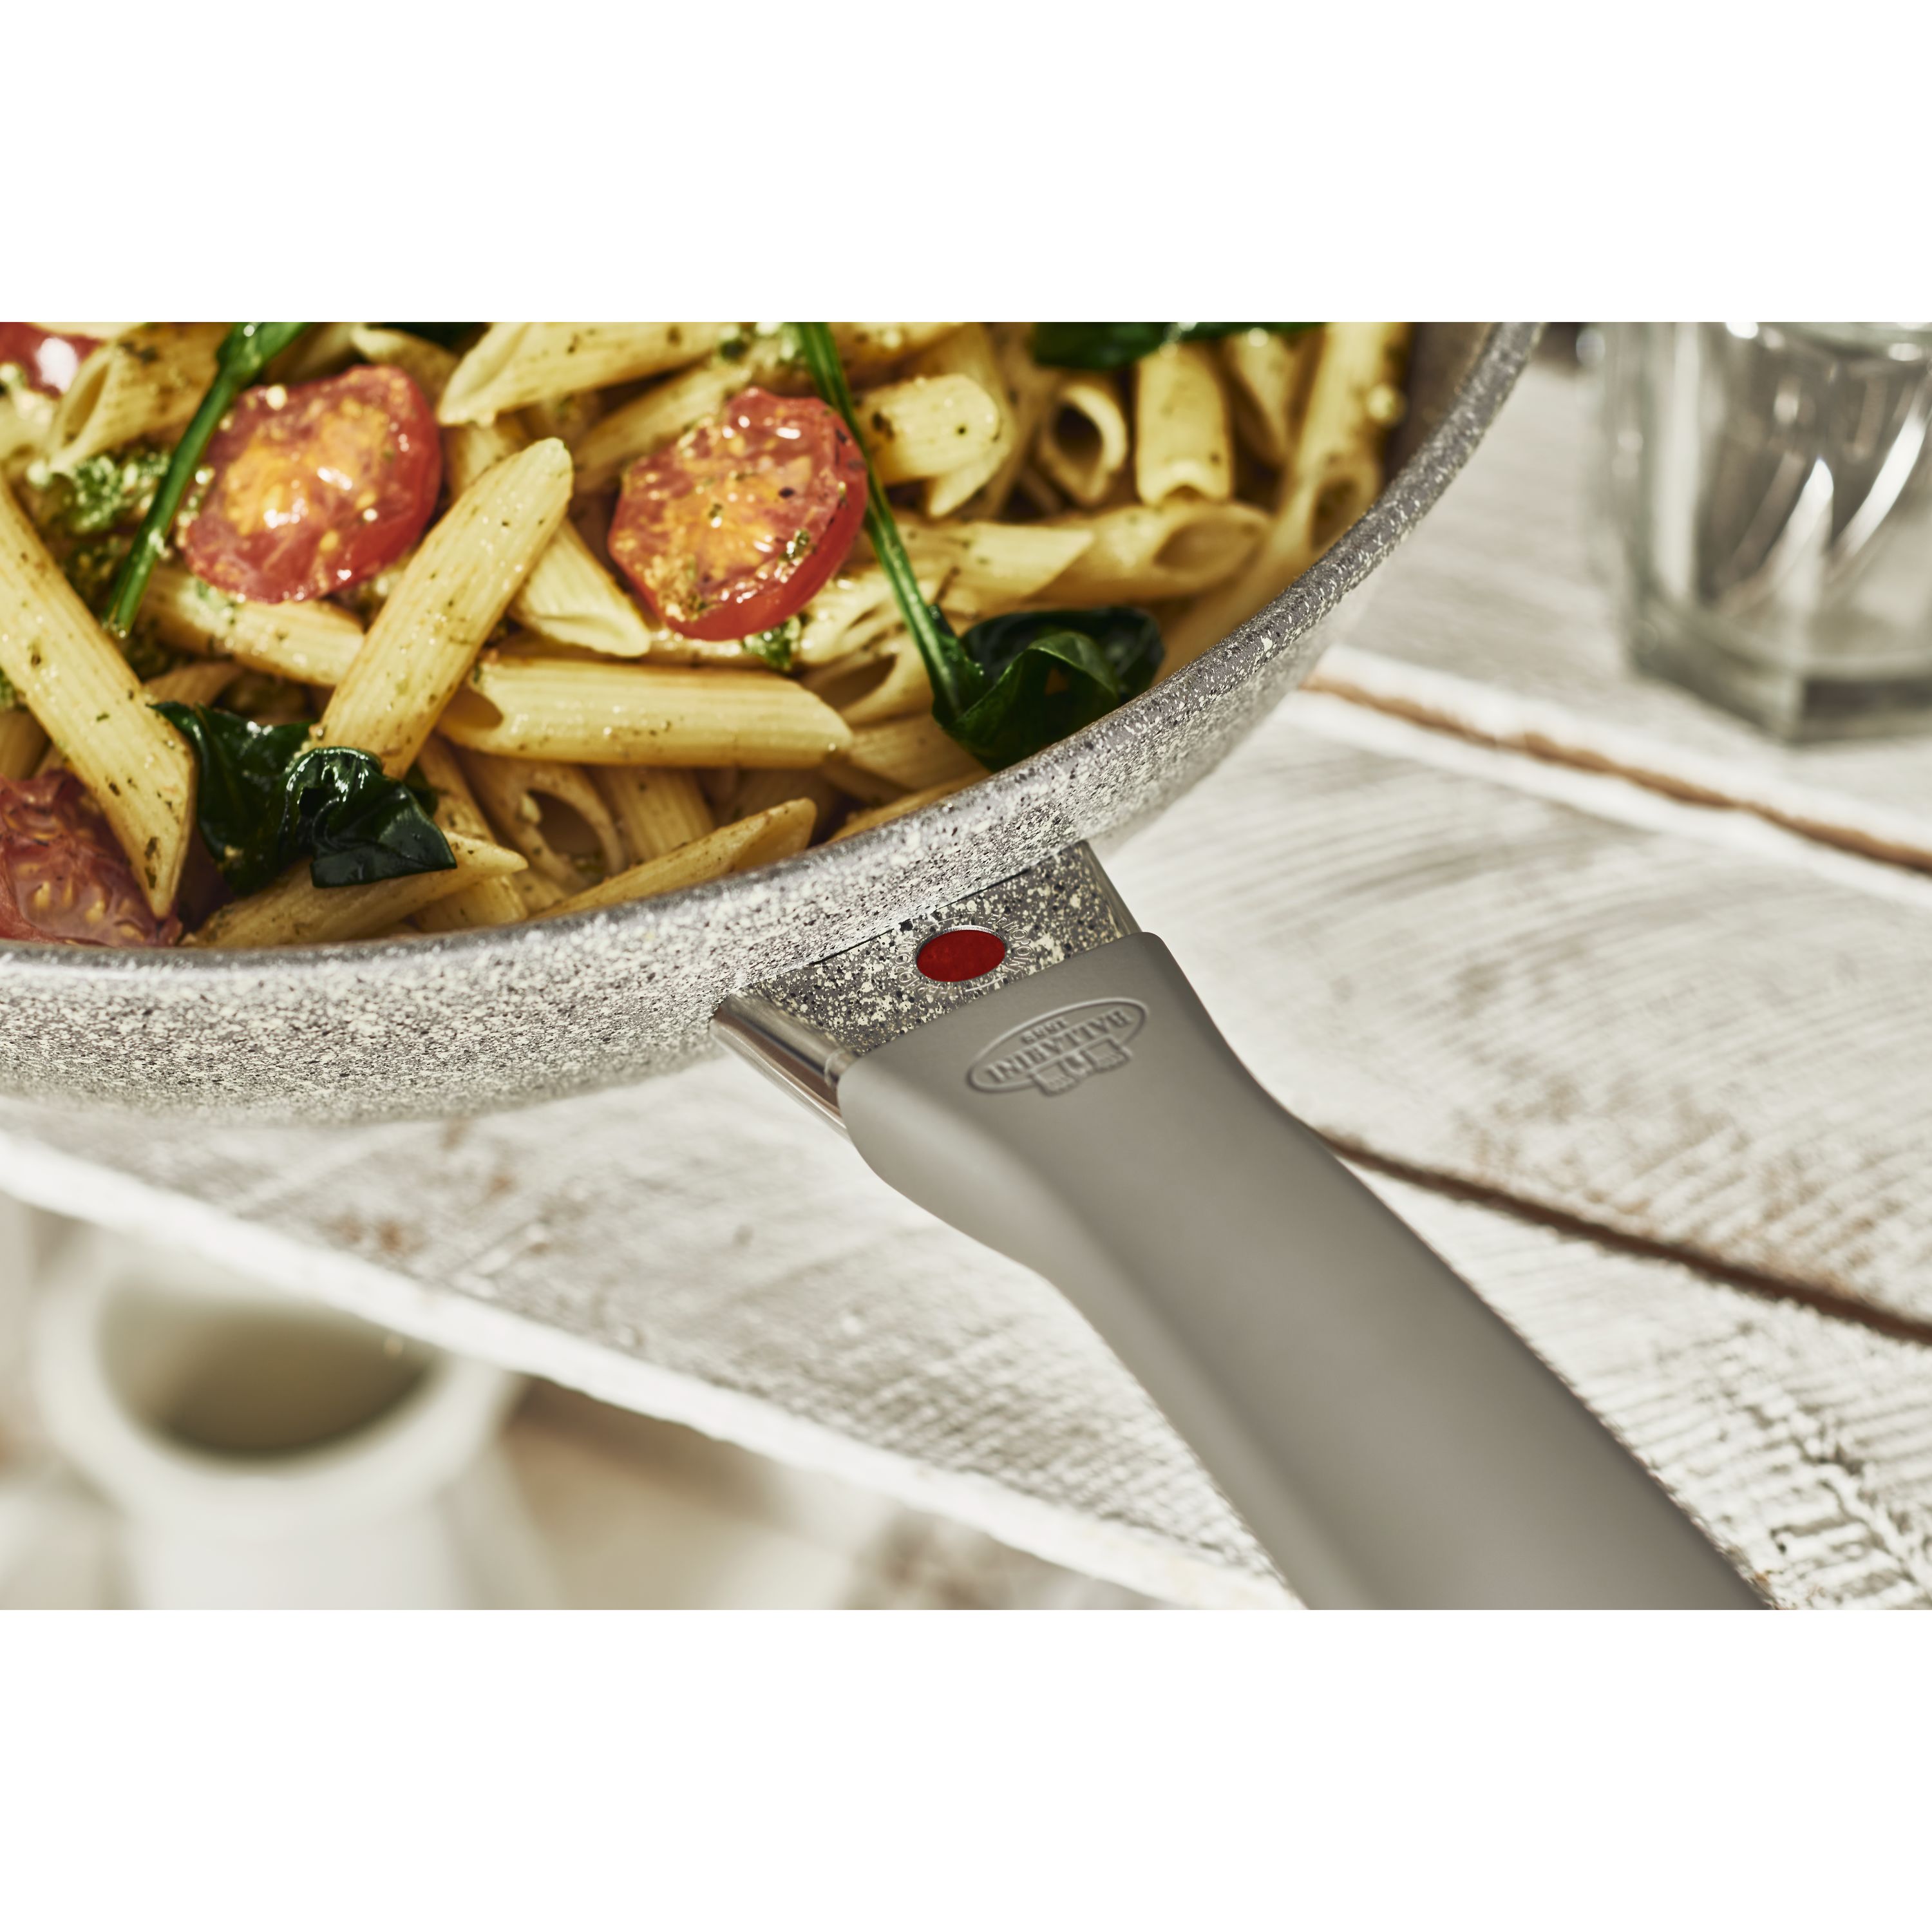 ZWILLING Madura Plus Forged 11-inch Nonstick Fry Pan, 11-inch - Foods Co.